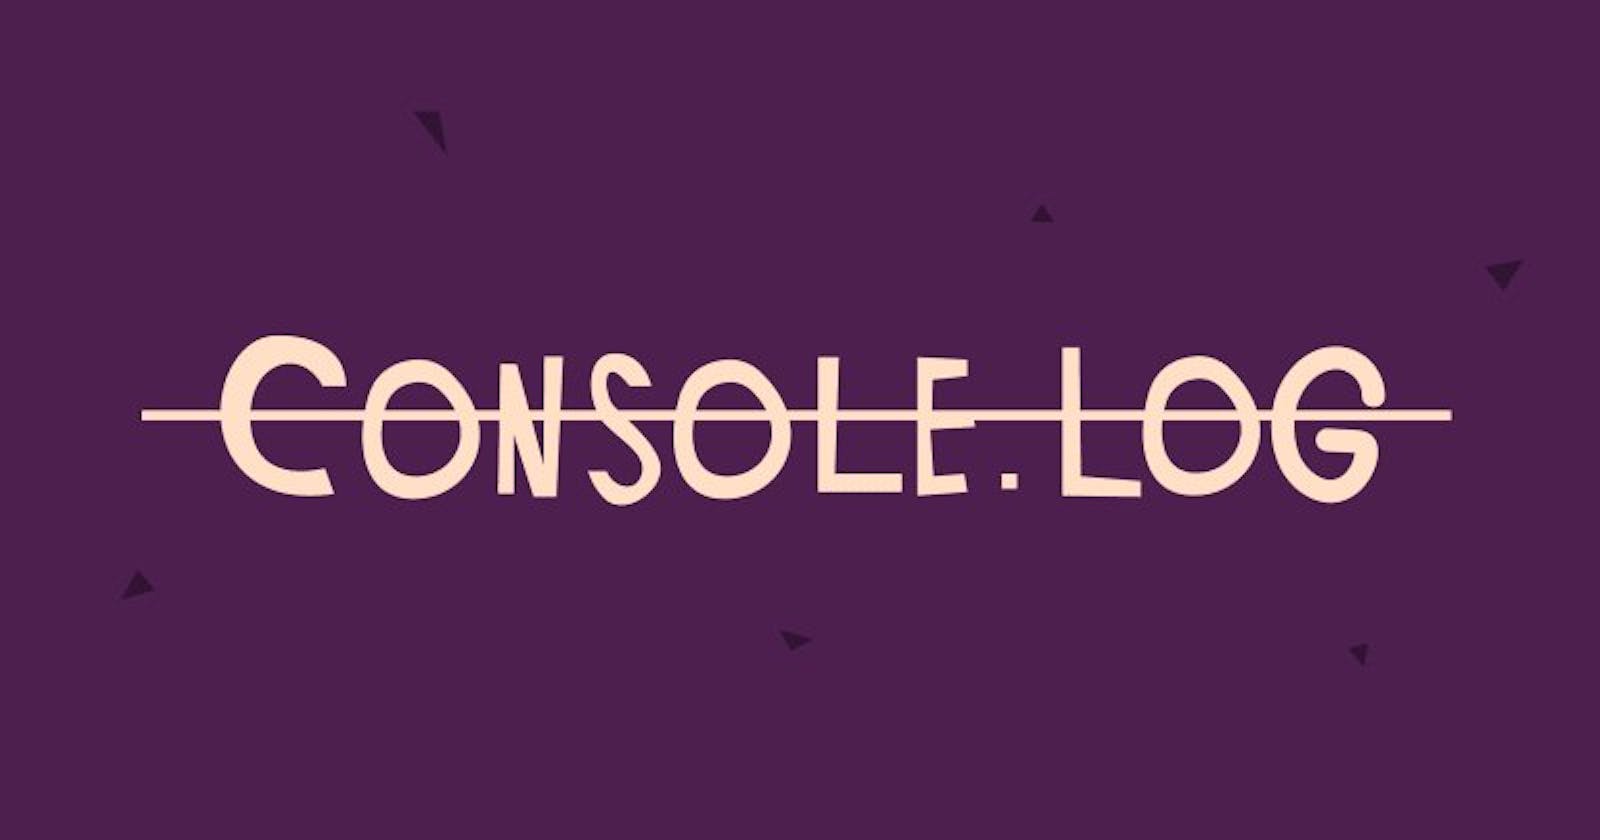 Say Goodbye to console.log from Production environment